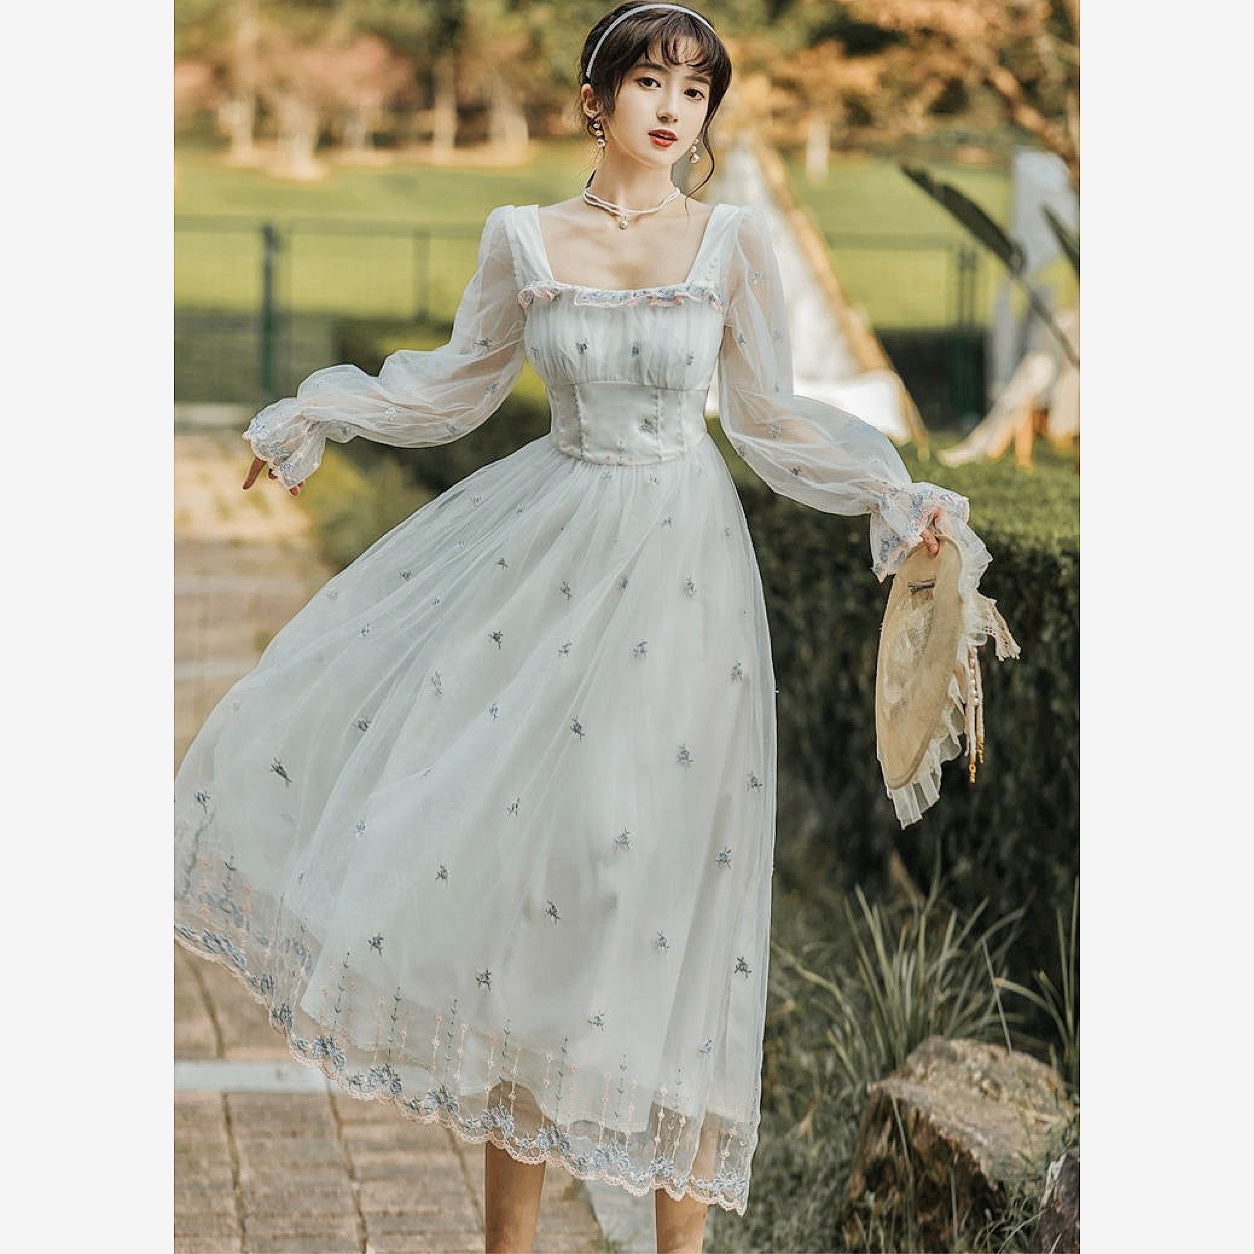 Delicate Embroidered Tulle Fairytale Princess Dress Fairycore Fashion